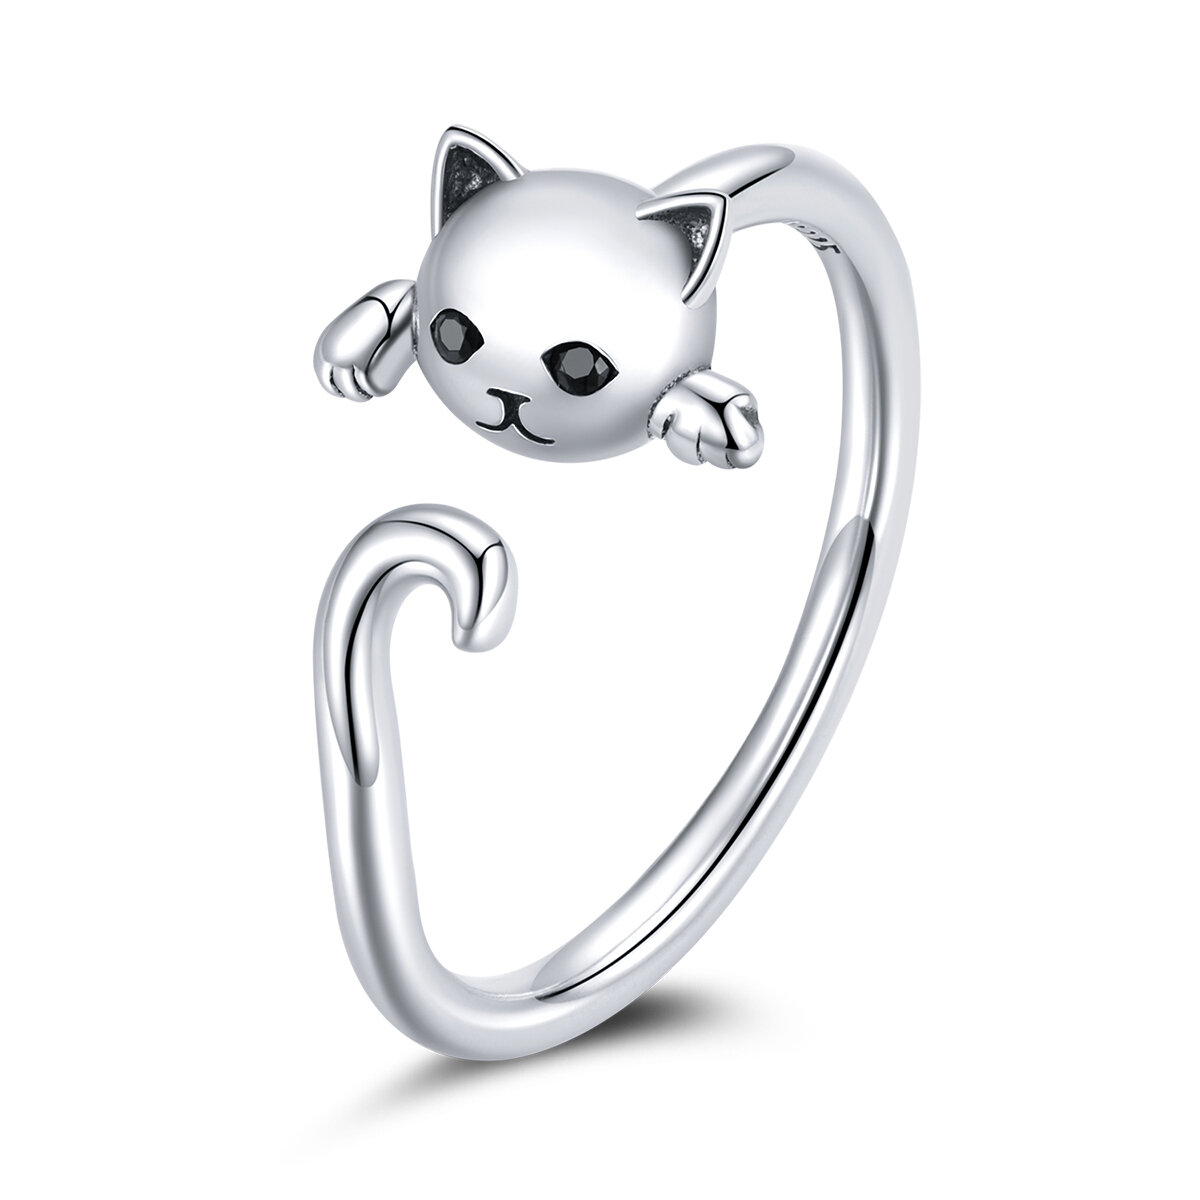 GemKing SCR707 Cute cat S925 Sterling Silver Ring